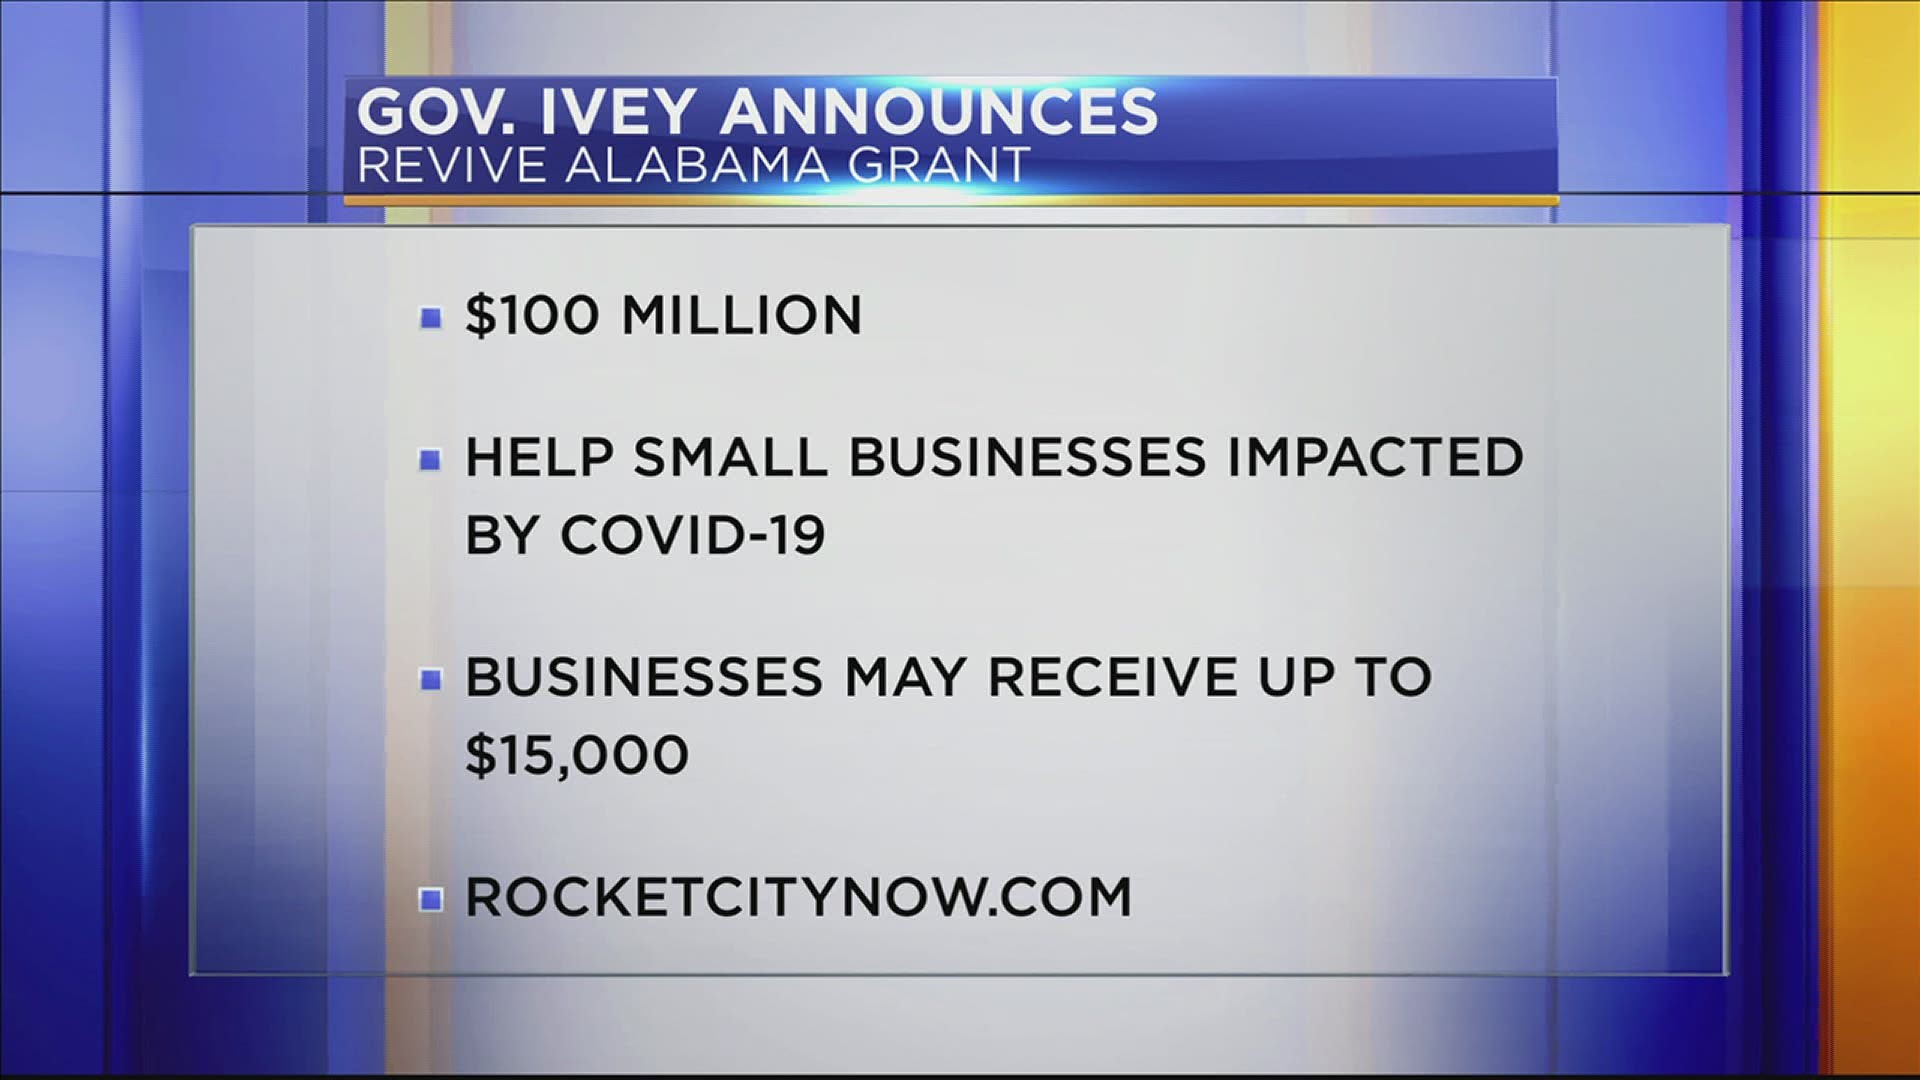 Businesses can apply to receive a portion of this grant money.